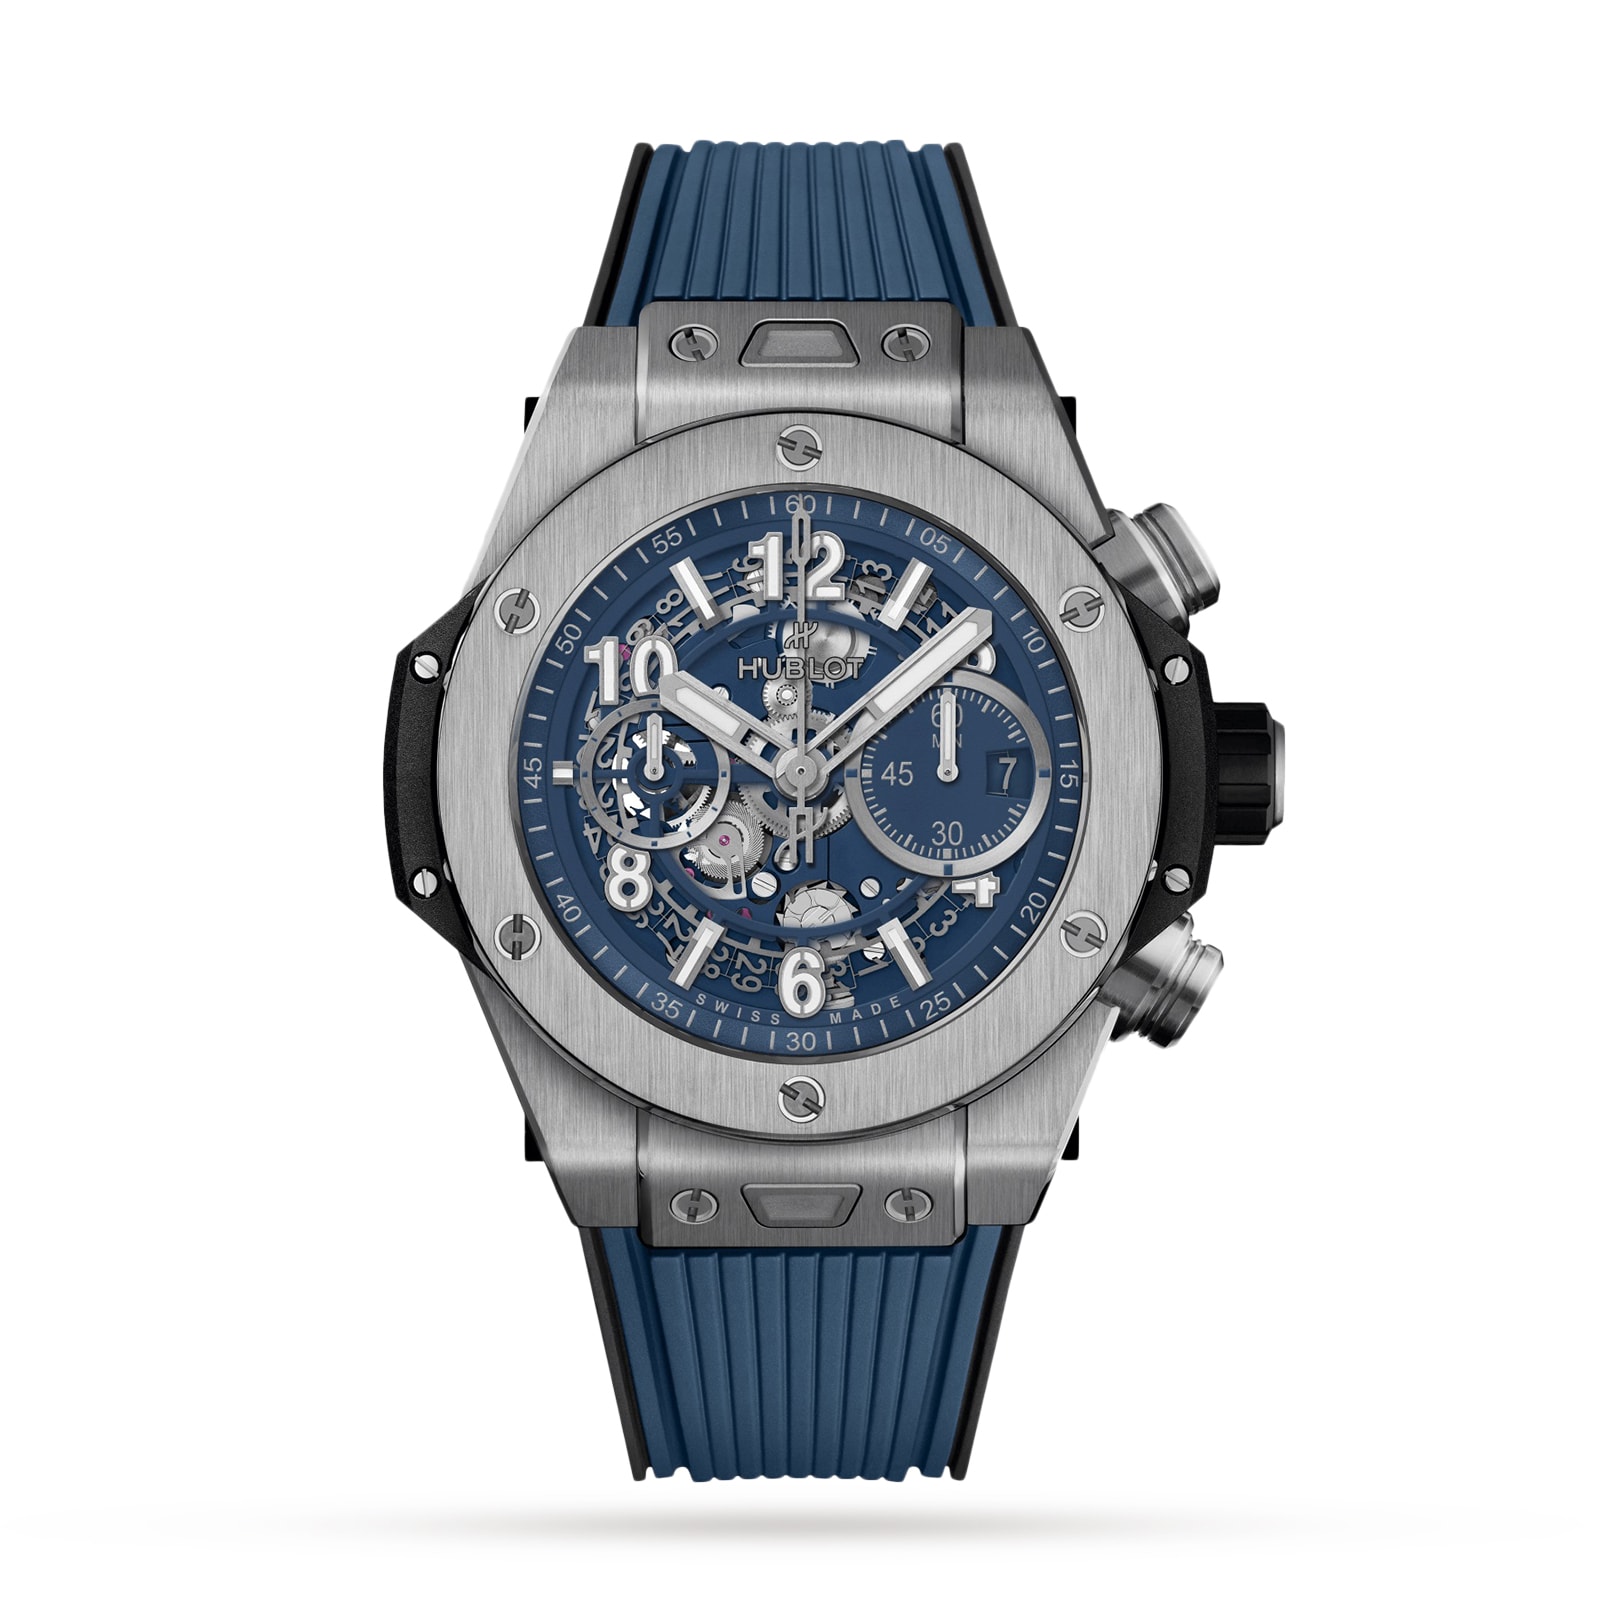 Hublot Big Bang Mens Watches: Learn The Features & Price Guide